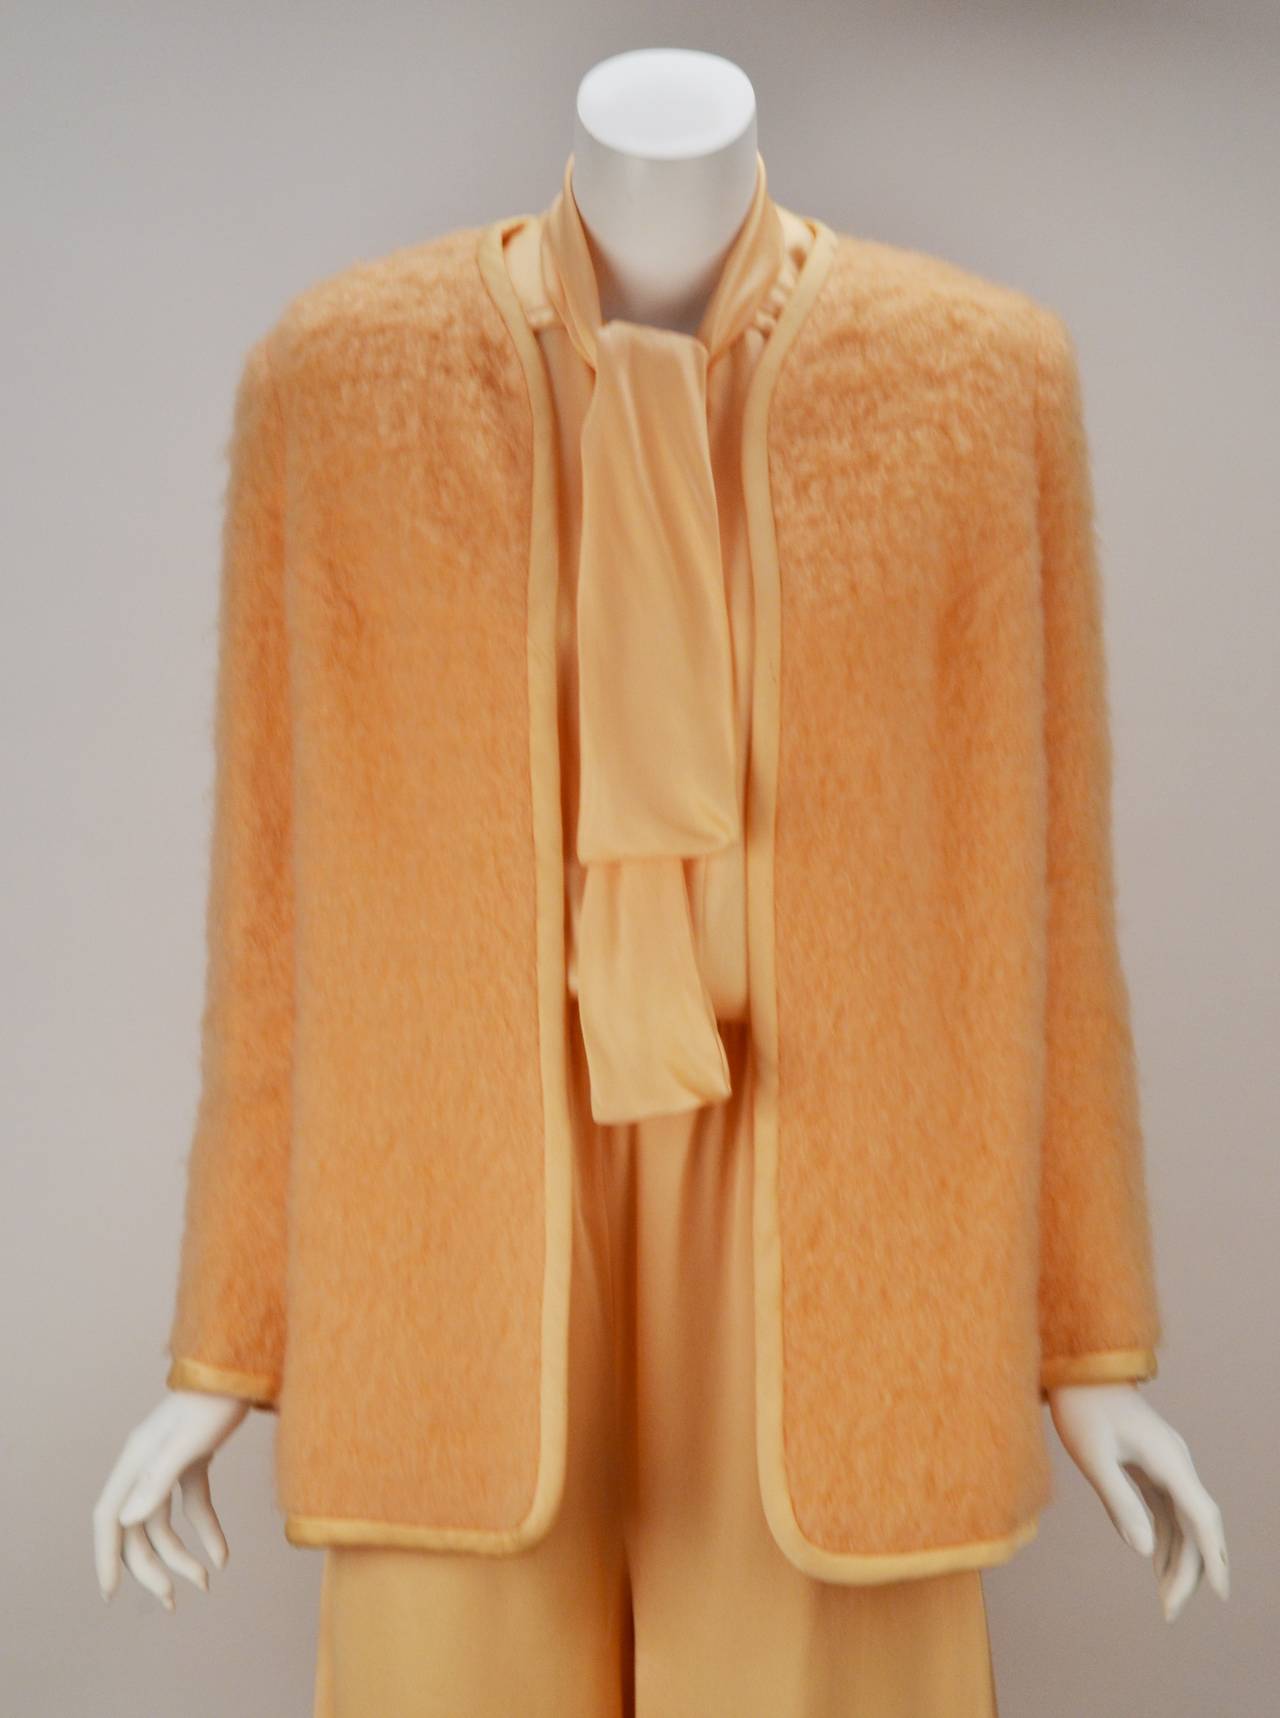 70s Bill Tice peach ensemble. Gaucho pants and button front blouse with tie create an easy flowing style. Add the peach brushed wool jacket for cool weather. Jacket is bound around neckline and sleeves. Boots, heels or flats can be worn with this